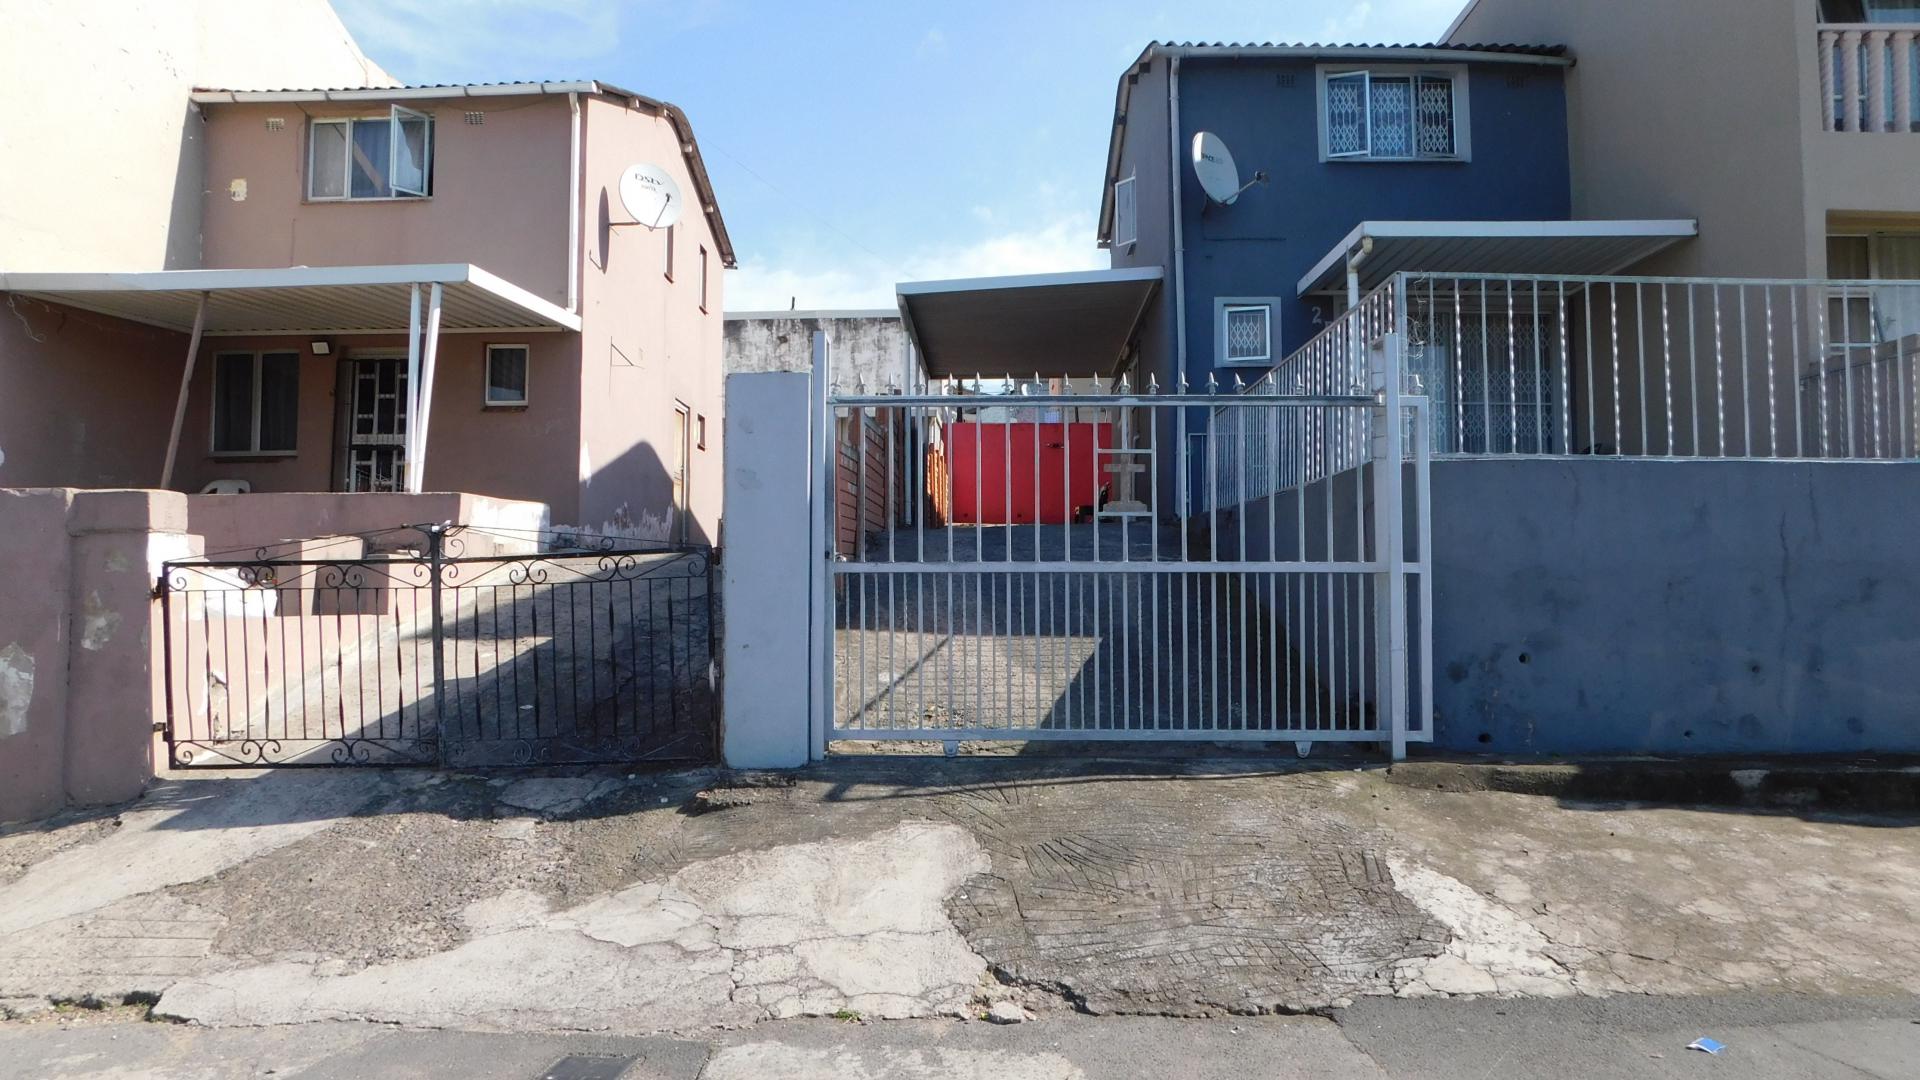 FNB Repossessed Eviction 2 Bedroom House for Sale in Chatswo